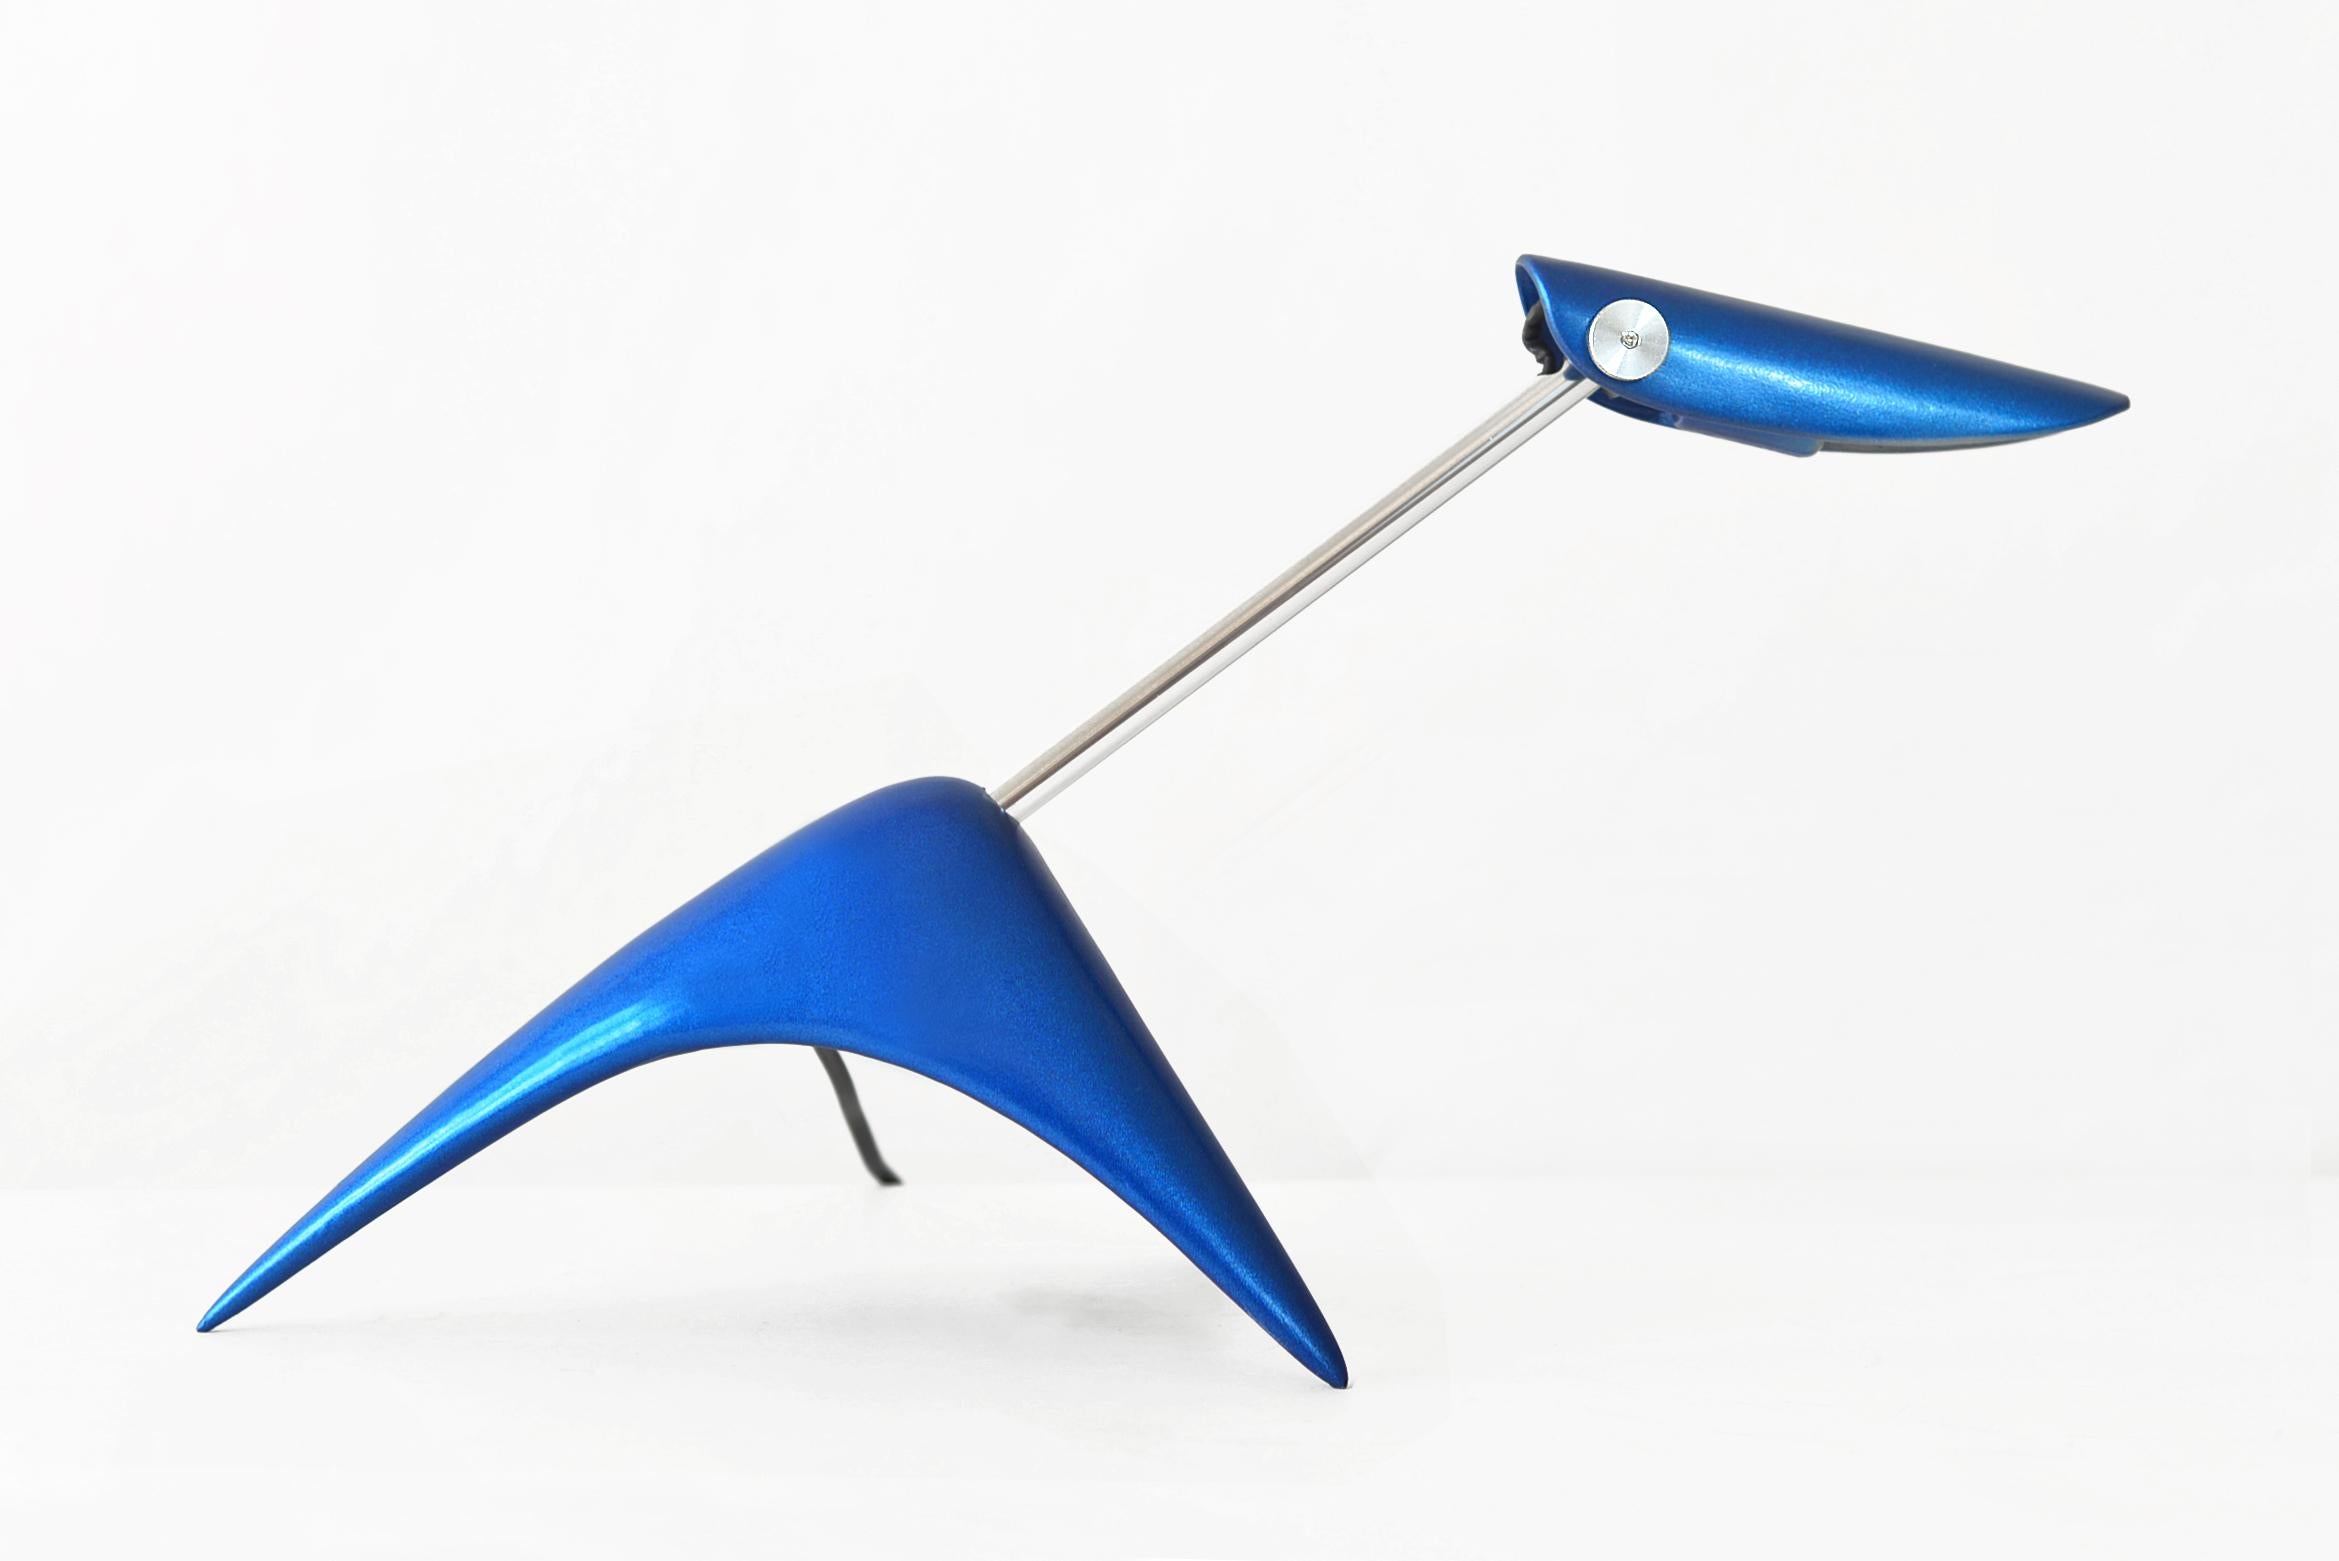 3-Pop Desk Lamp by Lucio Rossi
Dimensions: D 16 x W 48  x H 25  cm
Material: Lacquered recycled plastic, aluminum, stainless steel.
Weight: 0,65 kg
Available in 4 colors: matte white, varano red, metallic purple, and Argentina's blue.

Compact,